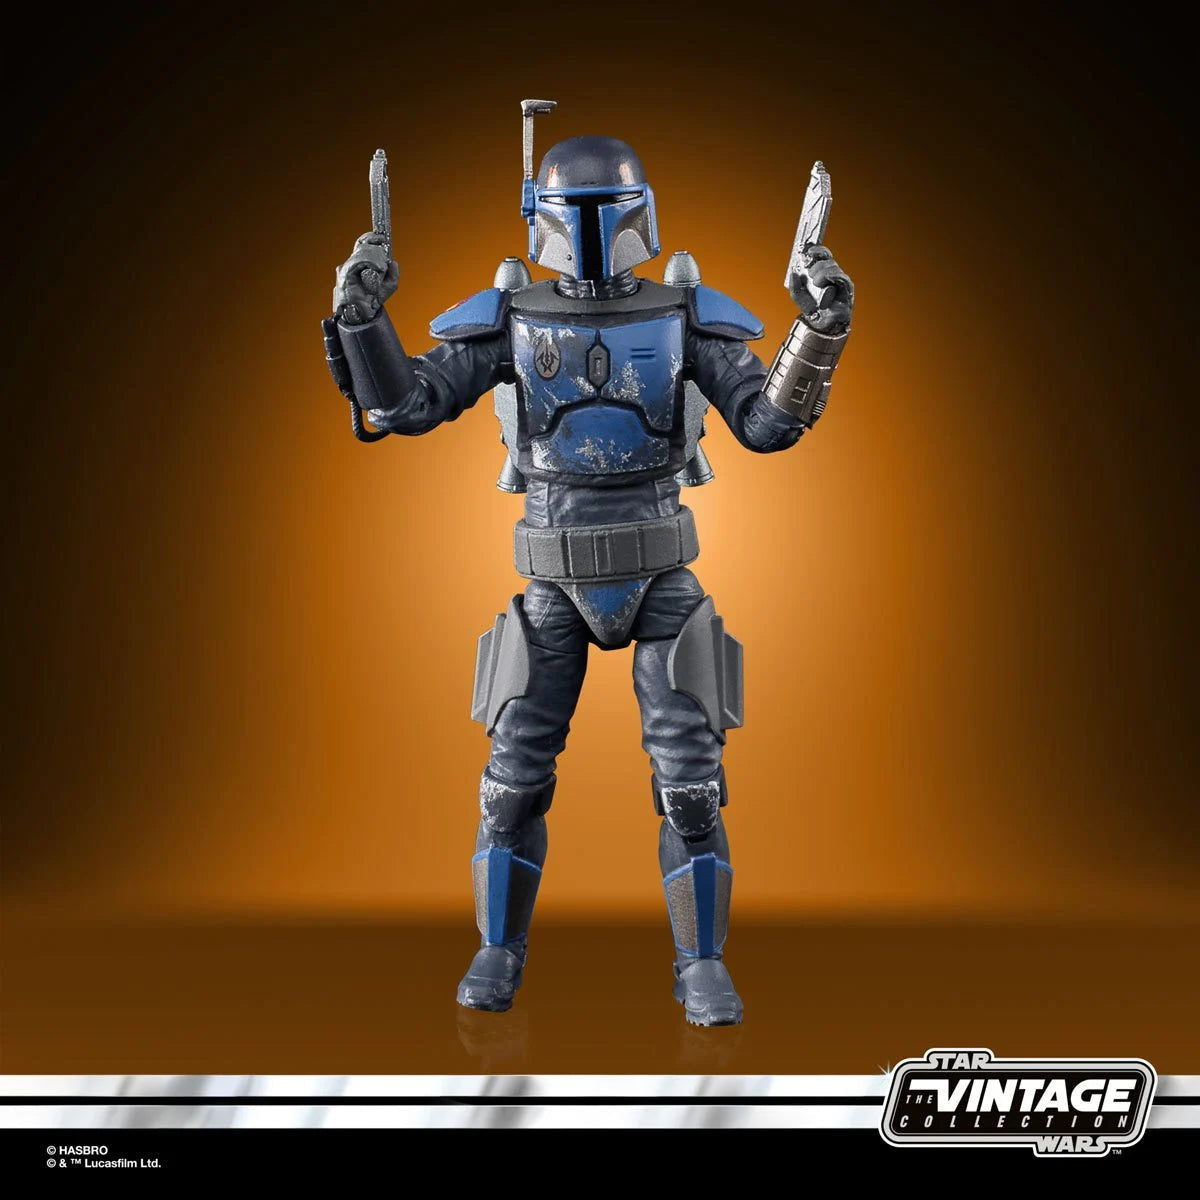 Star Wars: The Vintage Collection Mandalorian Death Watch Airborne Trooper Hasbro